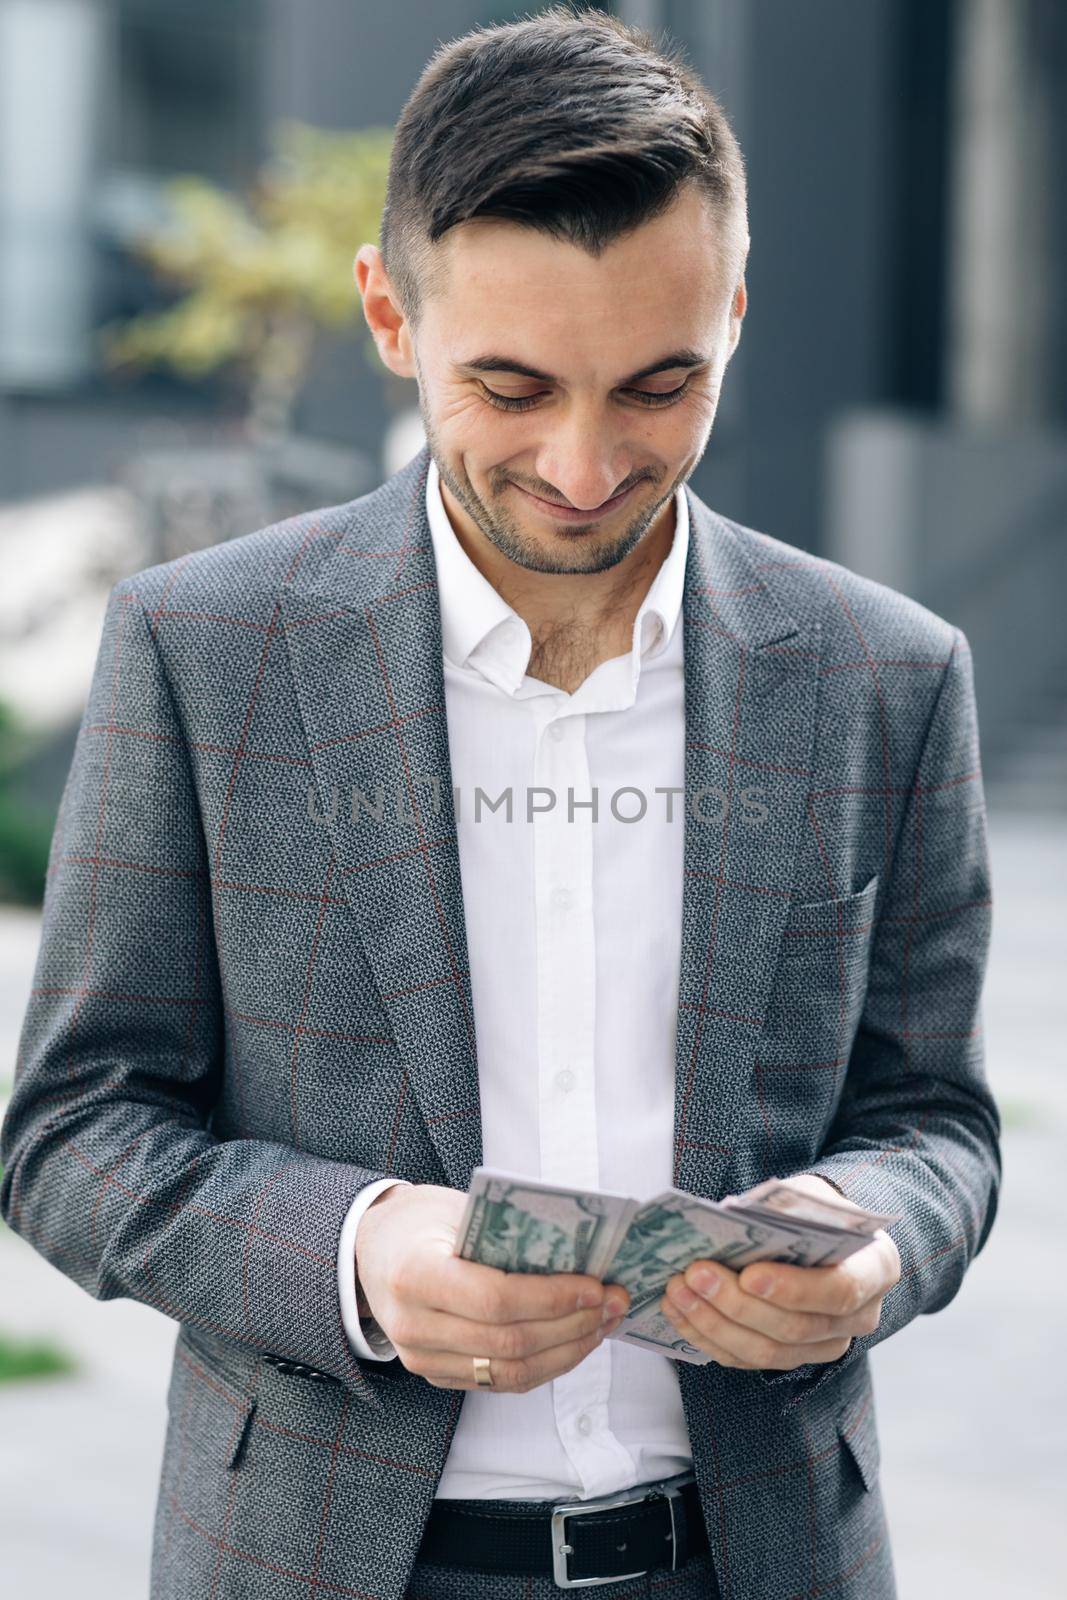 Handsome Rich Man Wearing Stylish Suit Counting Money Standing in the Street Near Office Building by uflypro